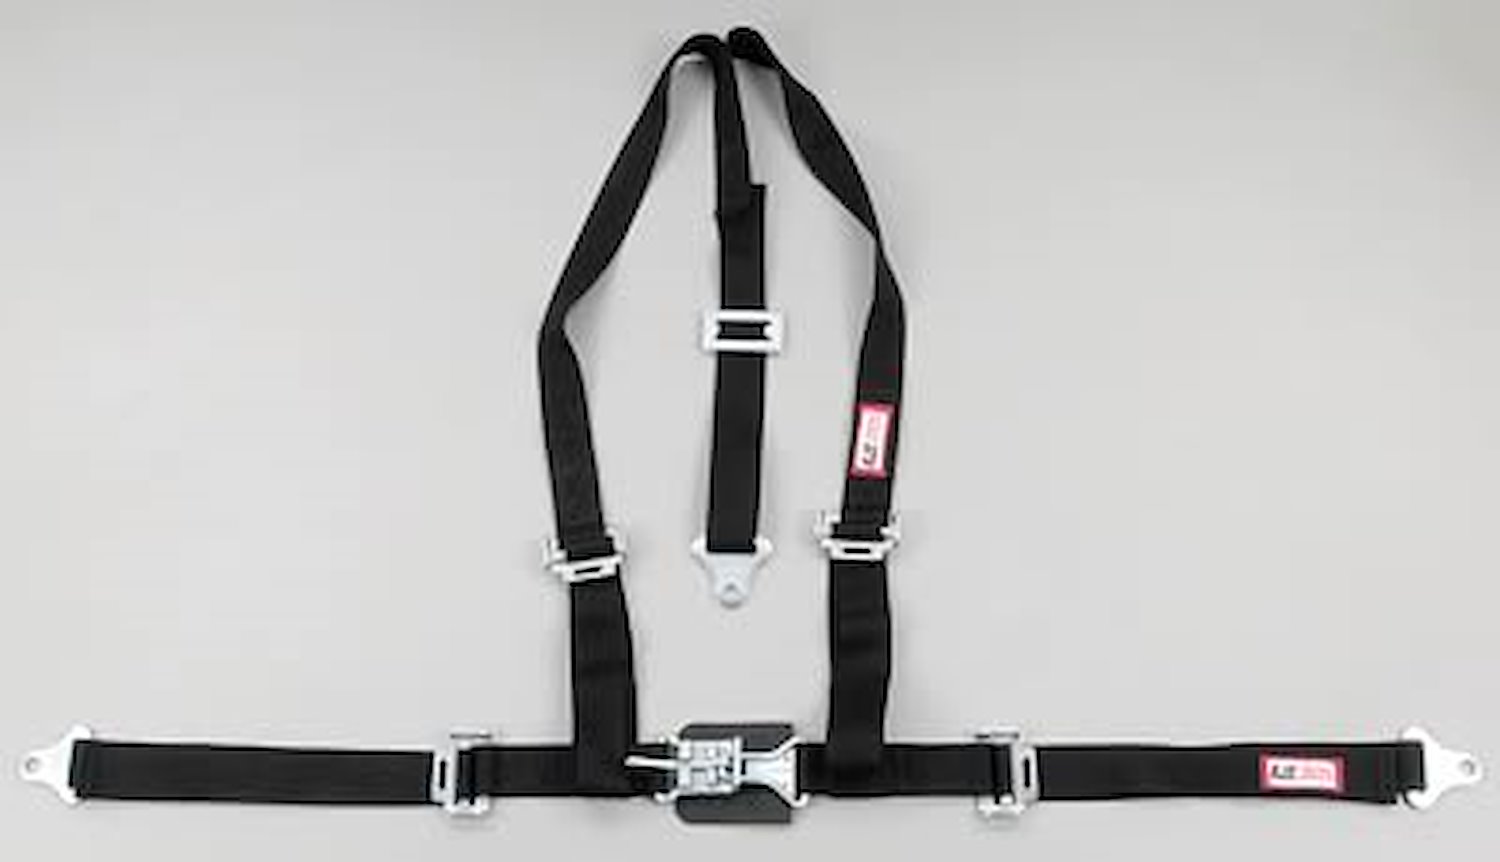 NON-SFI L&L HARNESS 2 PULL UP Lap Belt SEWN IN 2 S.H. INDIVIDUAL FLOOR Mount w/STERNUM STRAP ALL WRAP ENDS YELLOW